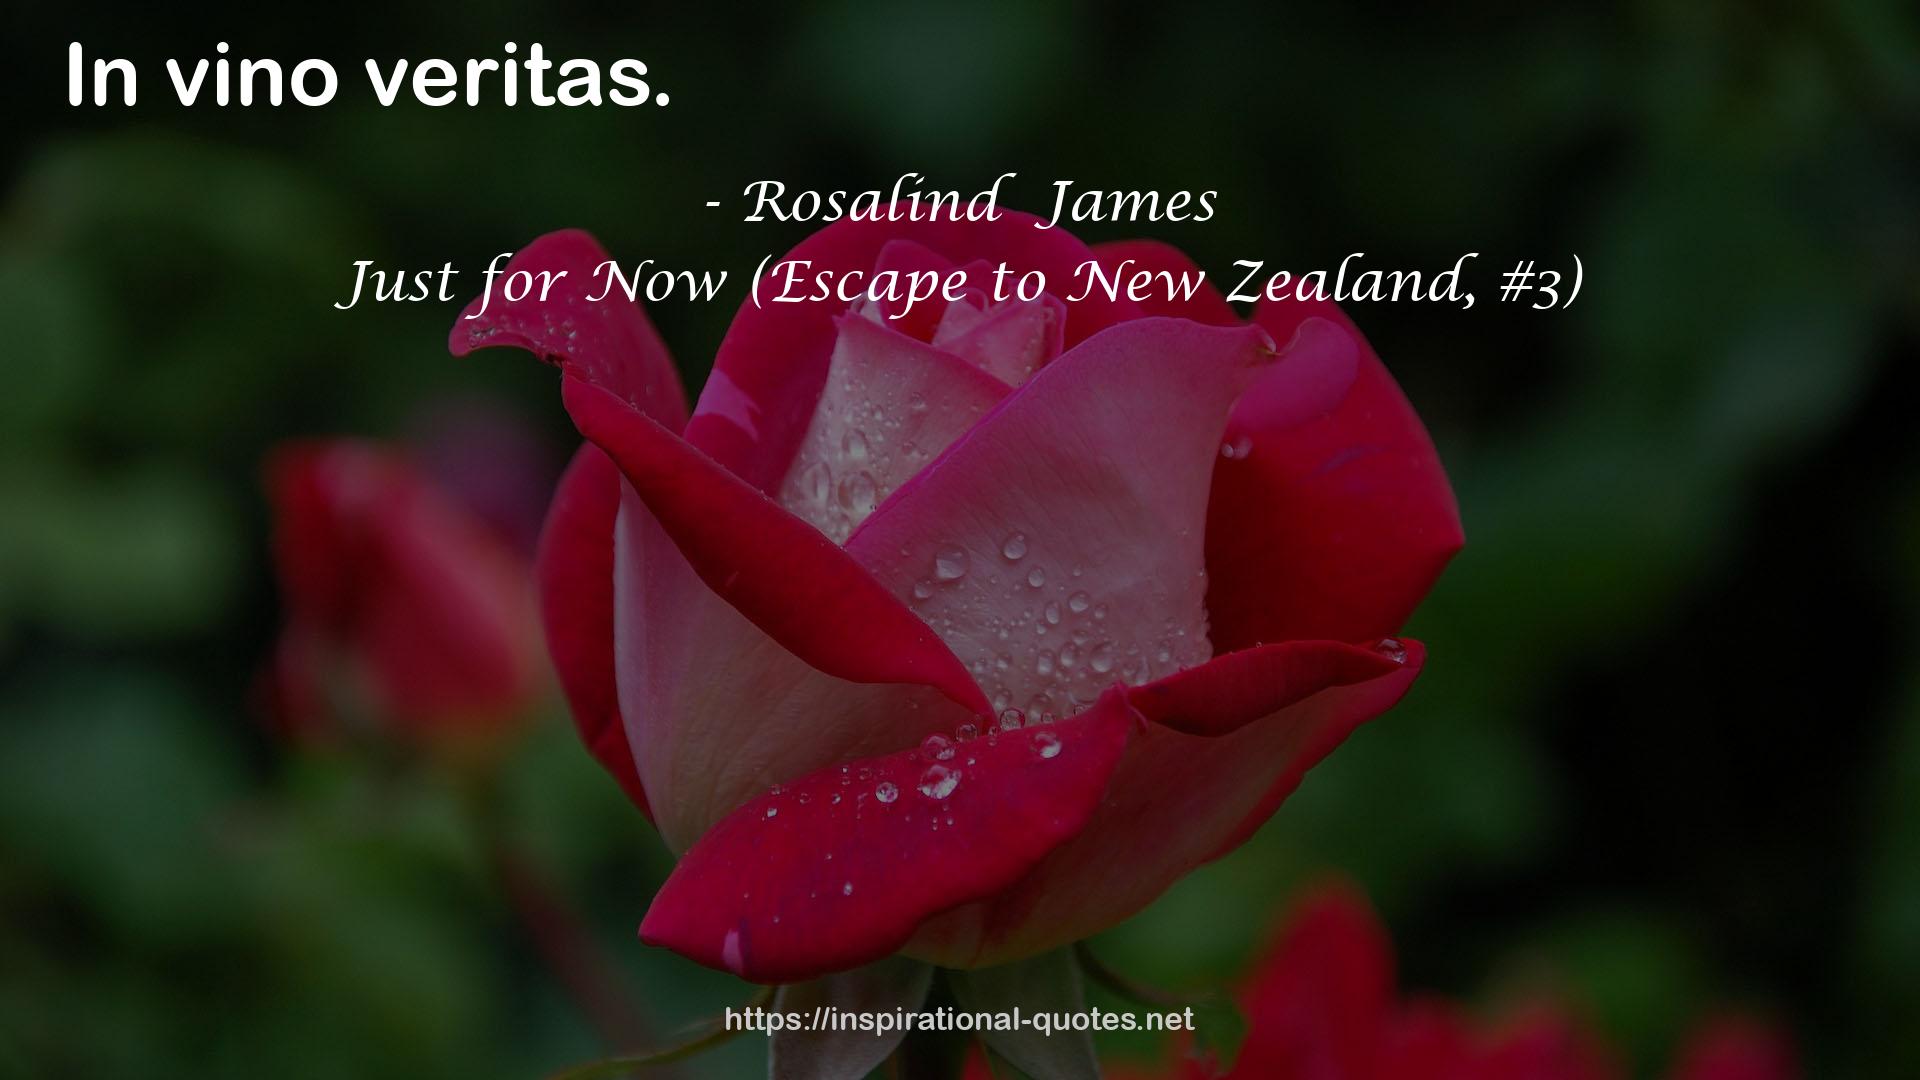 Just for Now (Escape to New Zealand, #3) QUOTES